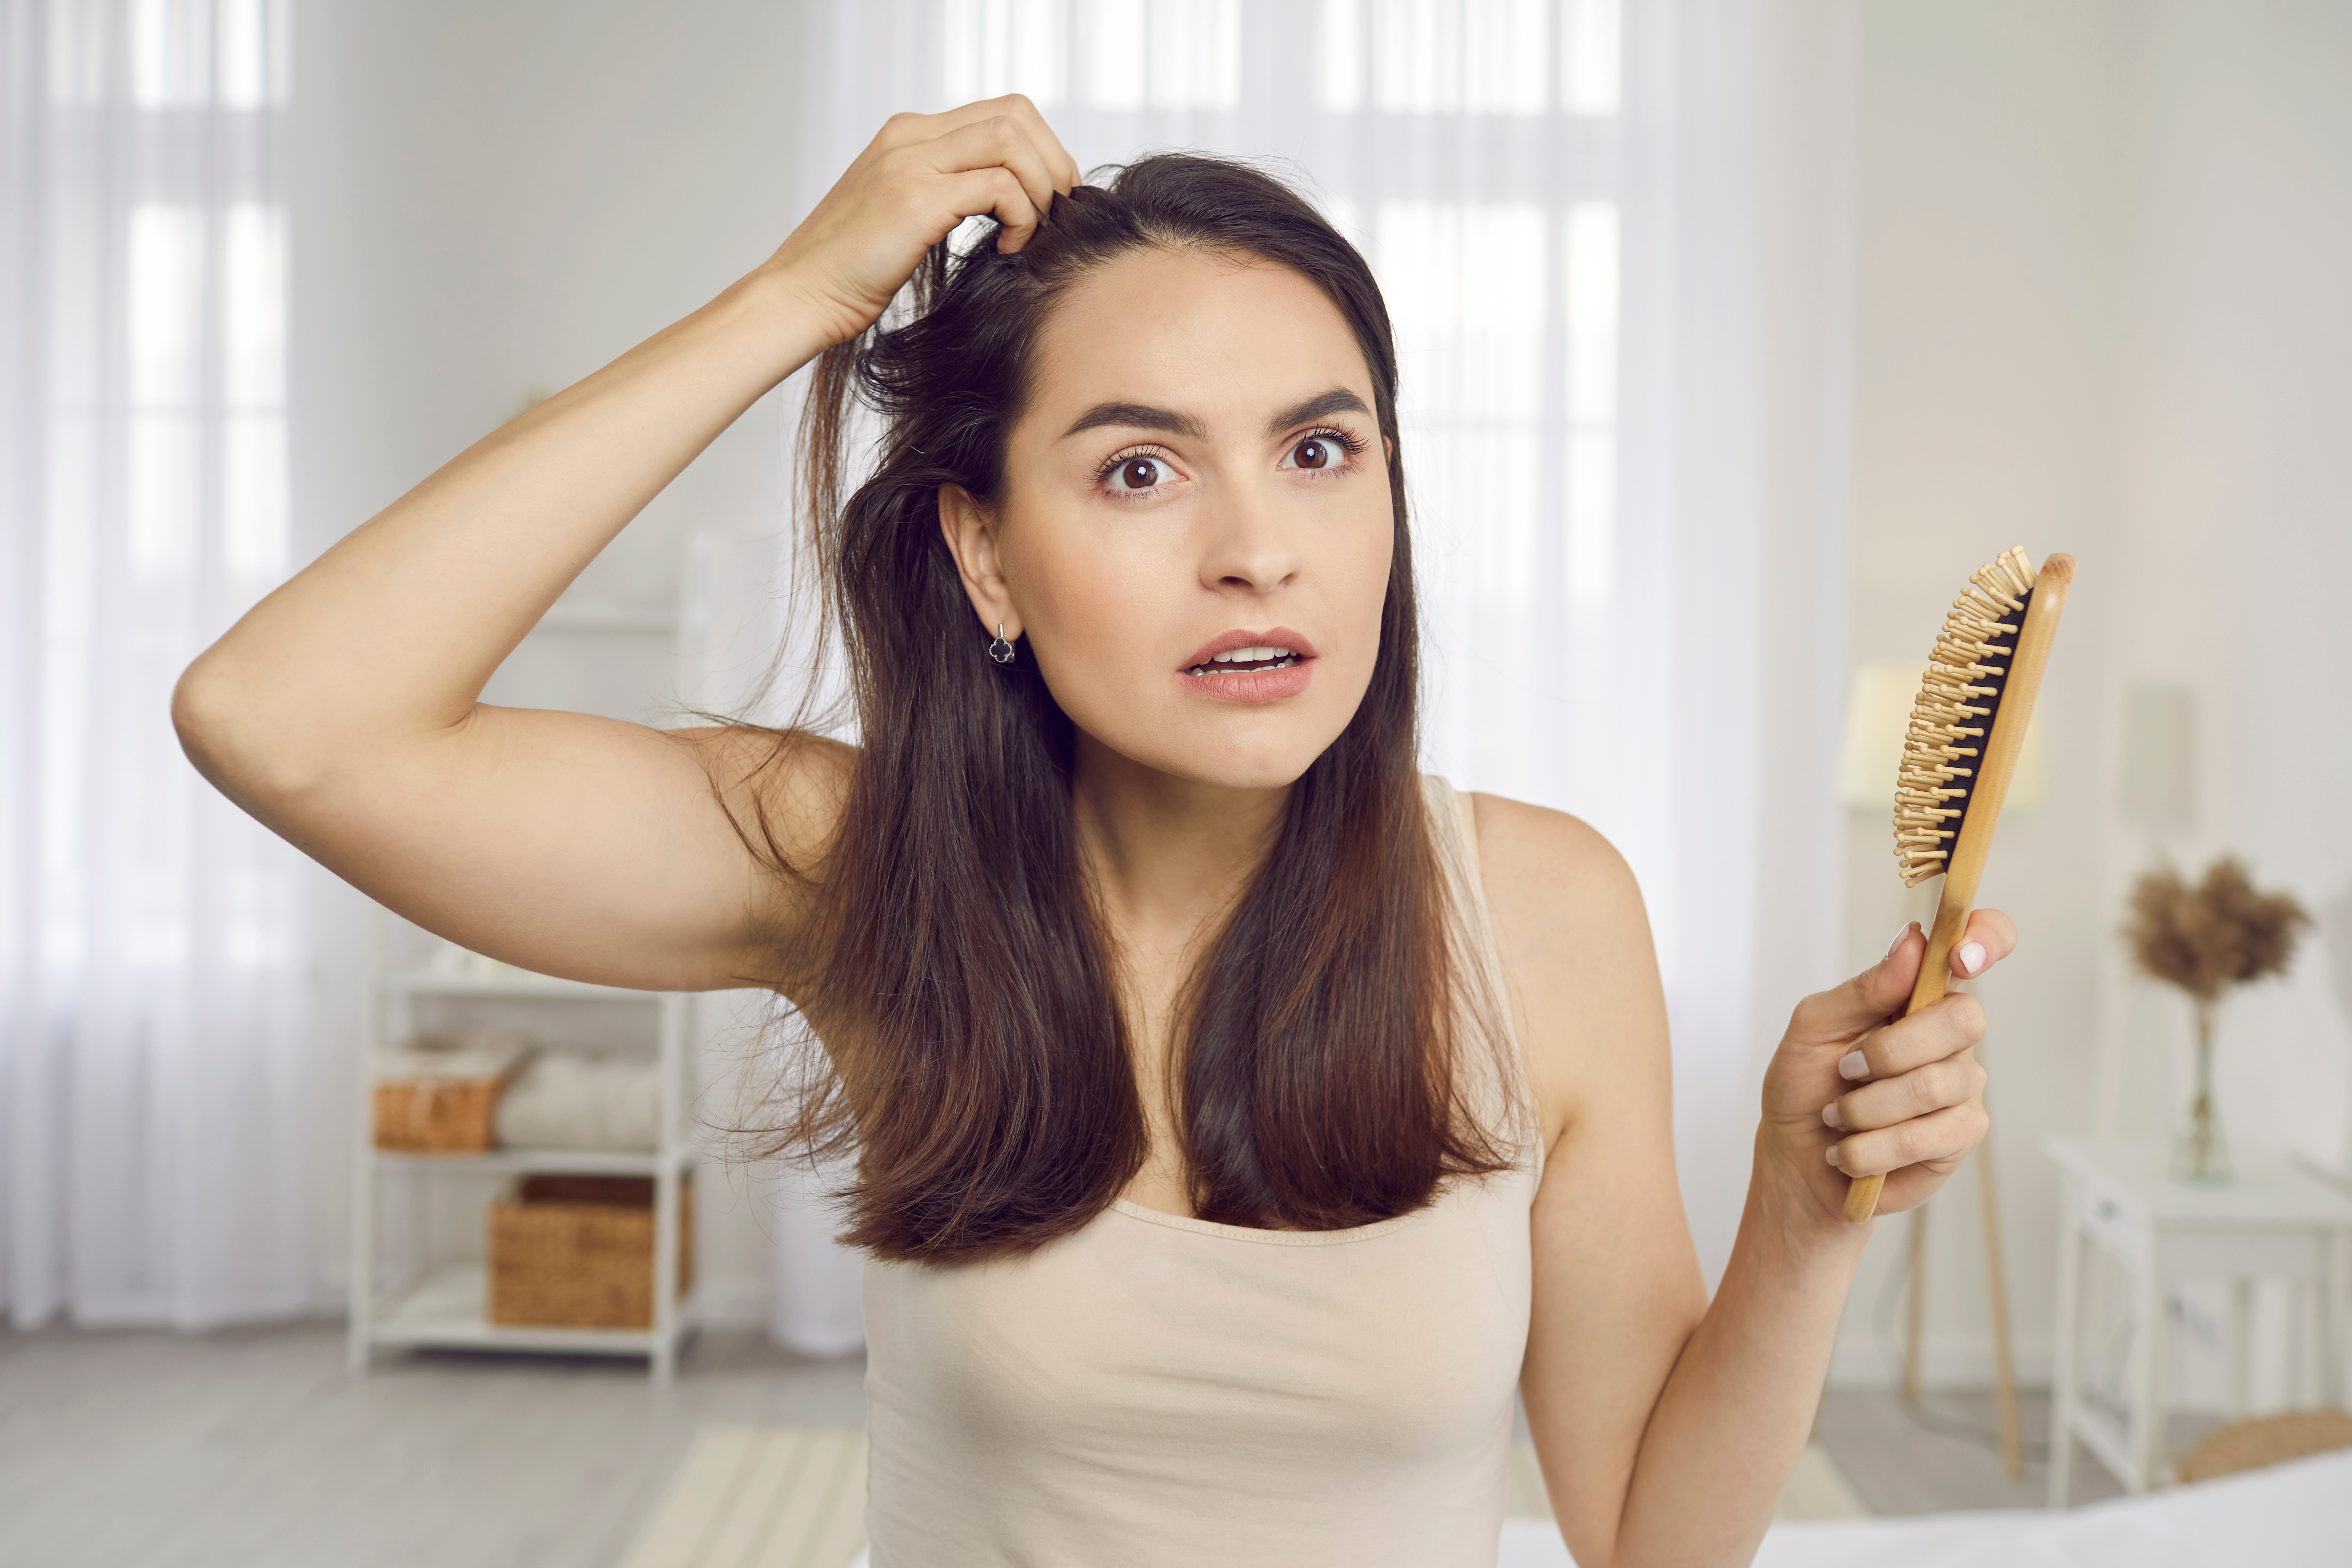 Hair Loss  Articles  Health Tips Questions  Answers Advice From Top  Doctors Health Experts  Lybrate